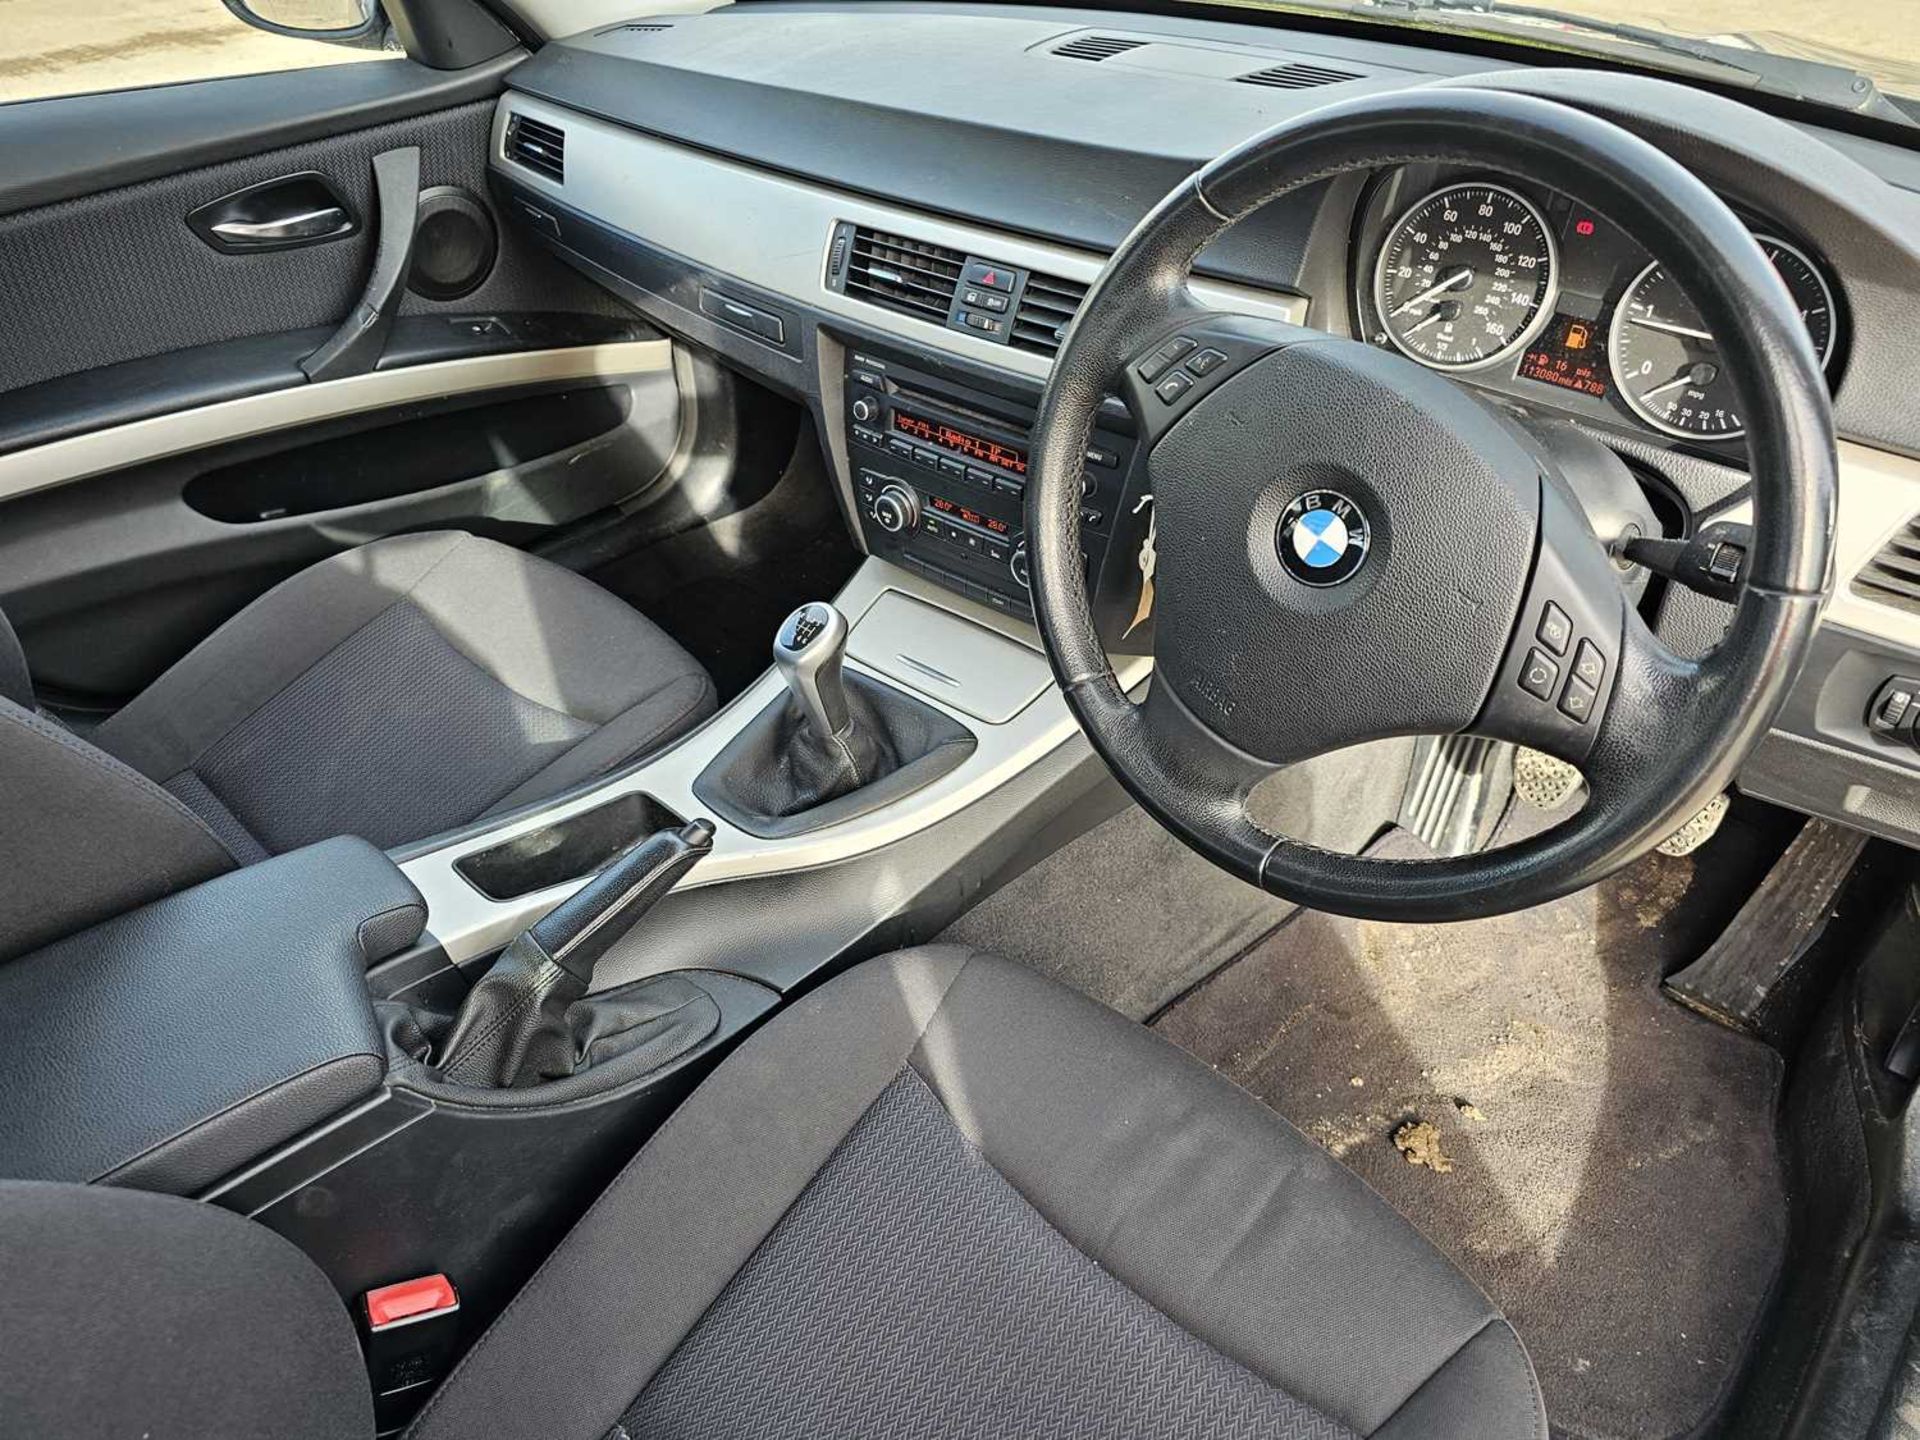 2011 BMW 320D, 6 Speed, Parking Sensors, Bluetooth, A/C (Reg. Docs. Available, Tested 01/25) - Image 18 of 28